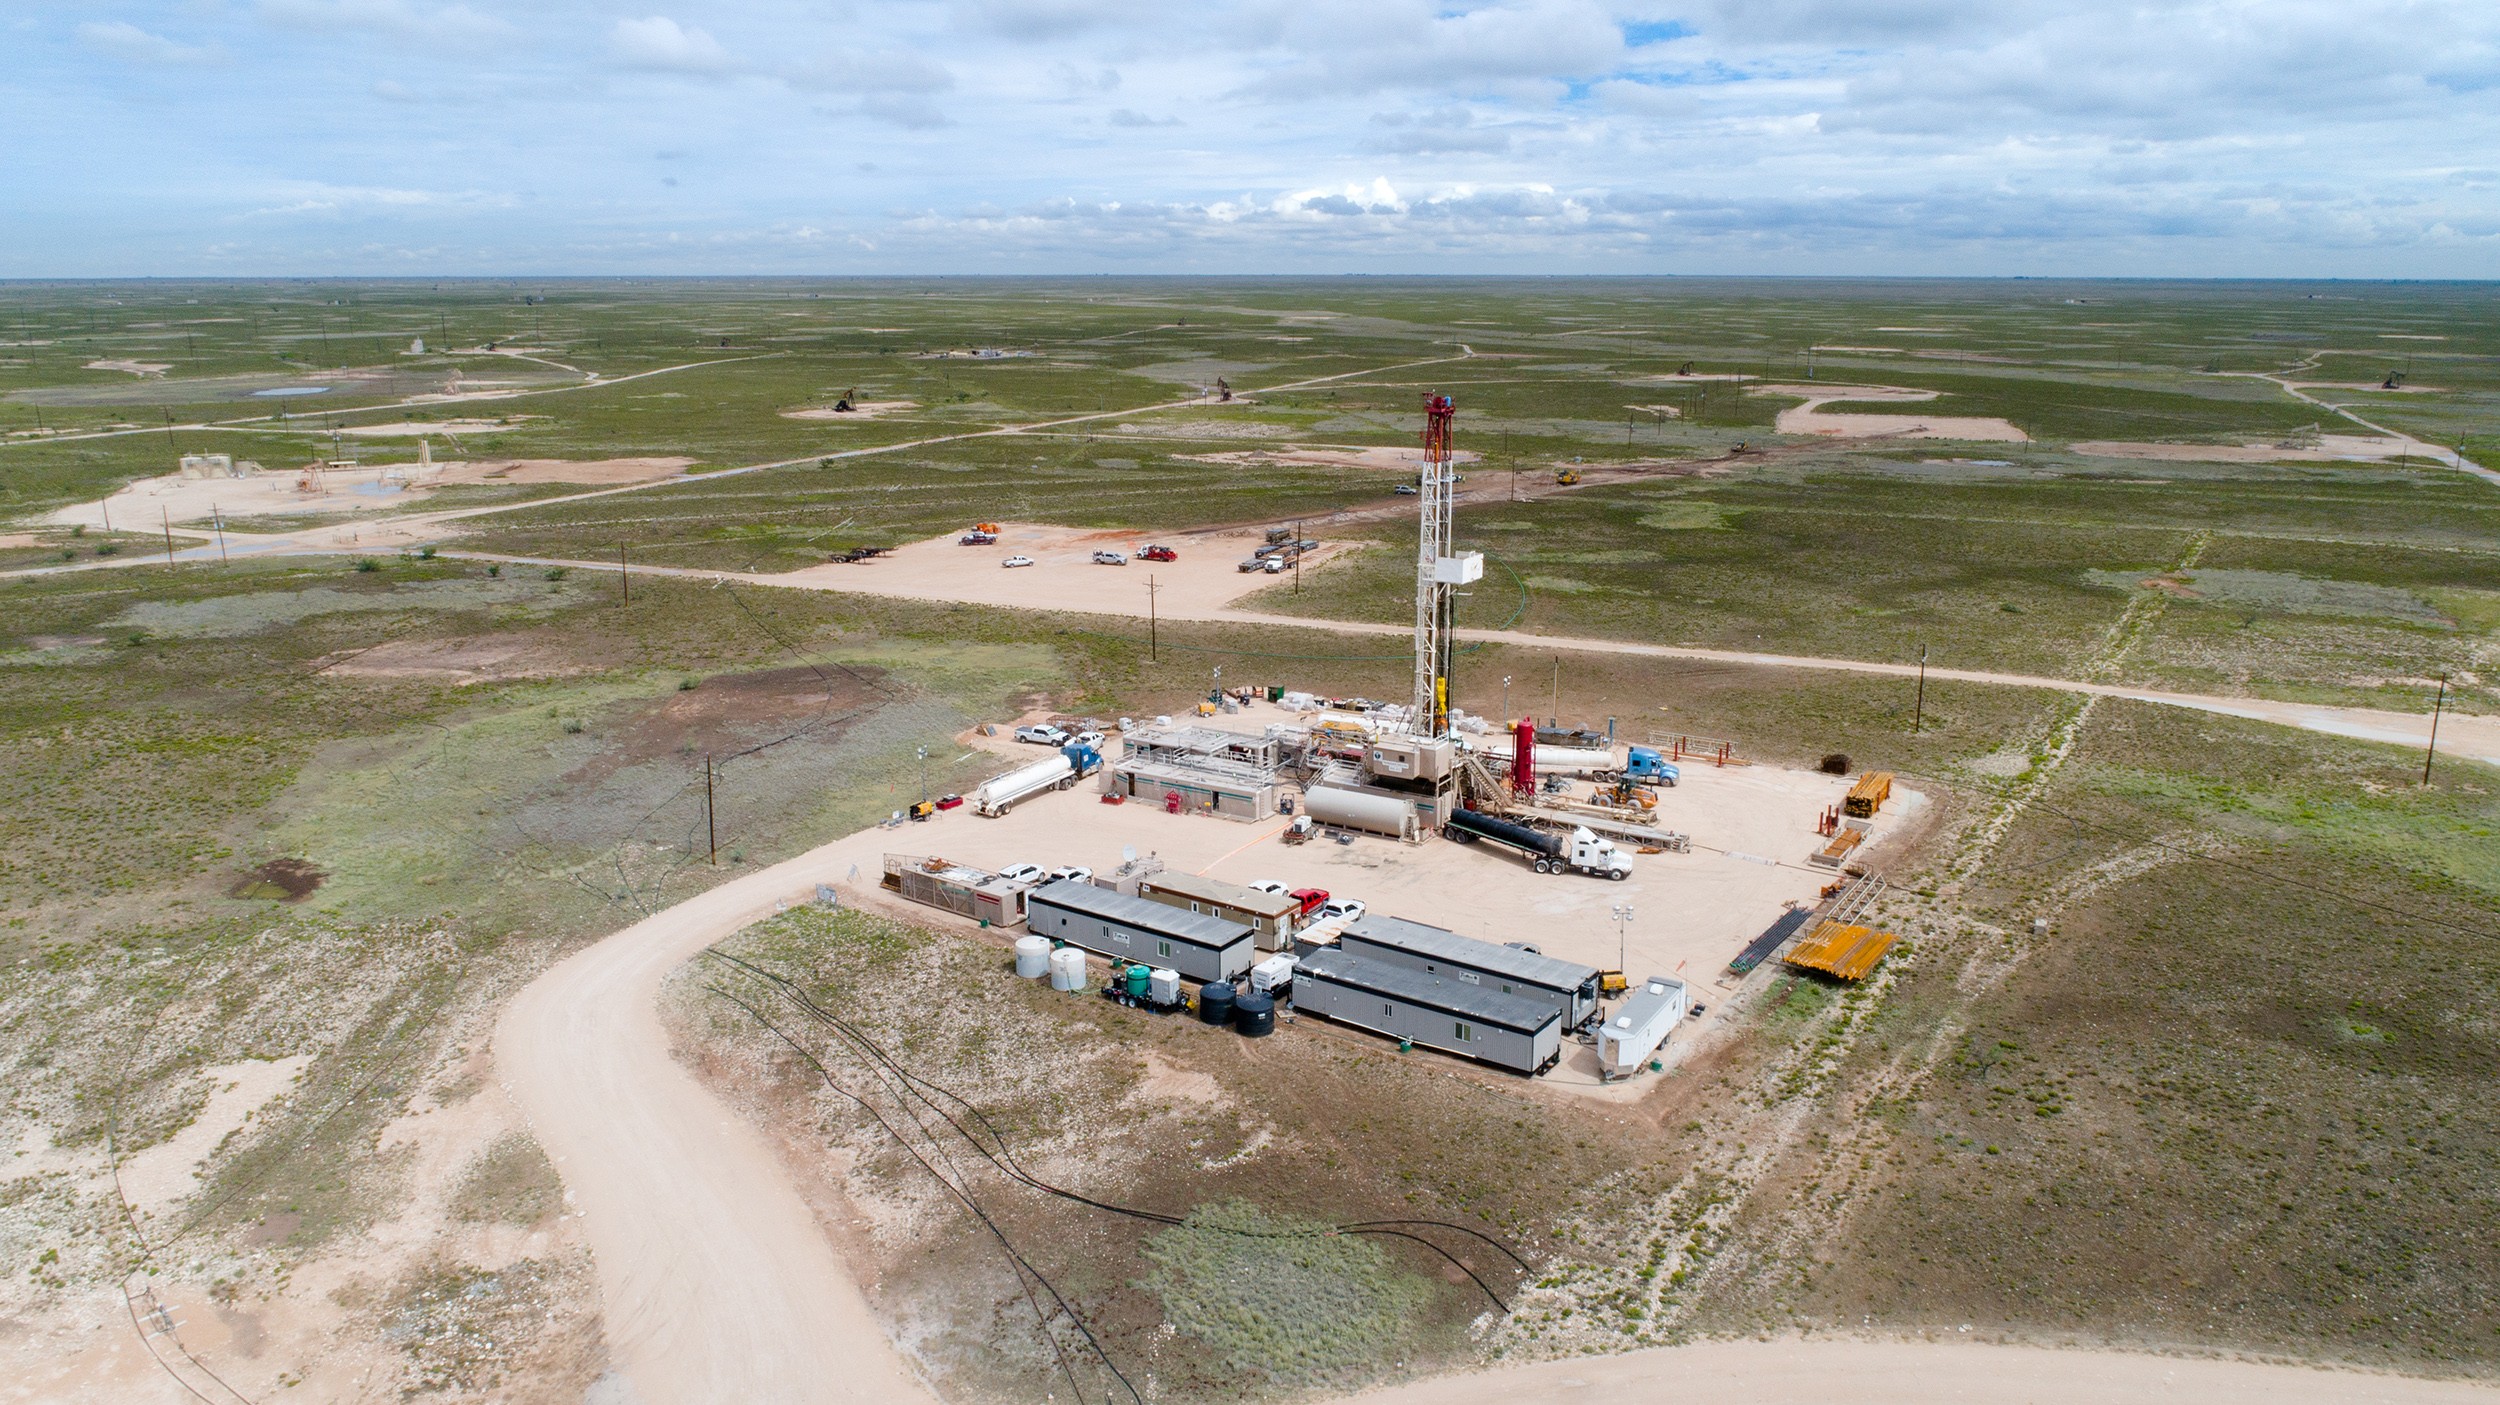 ConocoPhillips has an ongoing program of well workovers, artificial lift optimization and waterflood management activities to maximize the value of the existing base production in the Permian Basin. (Source: ConocoPhillips)